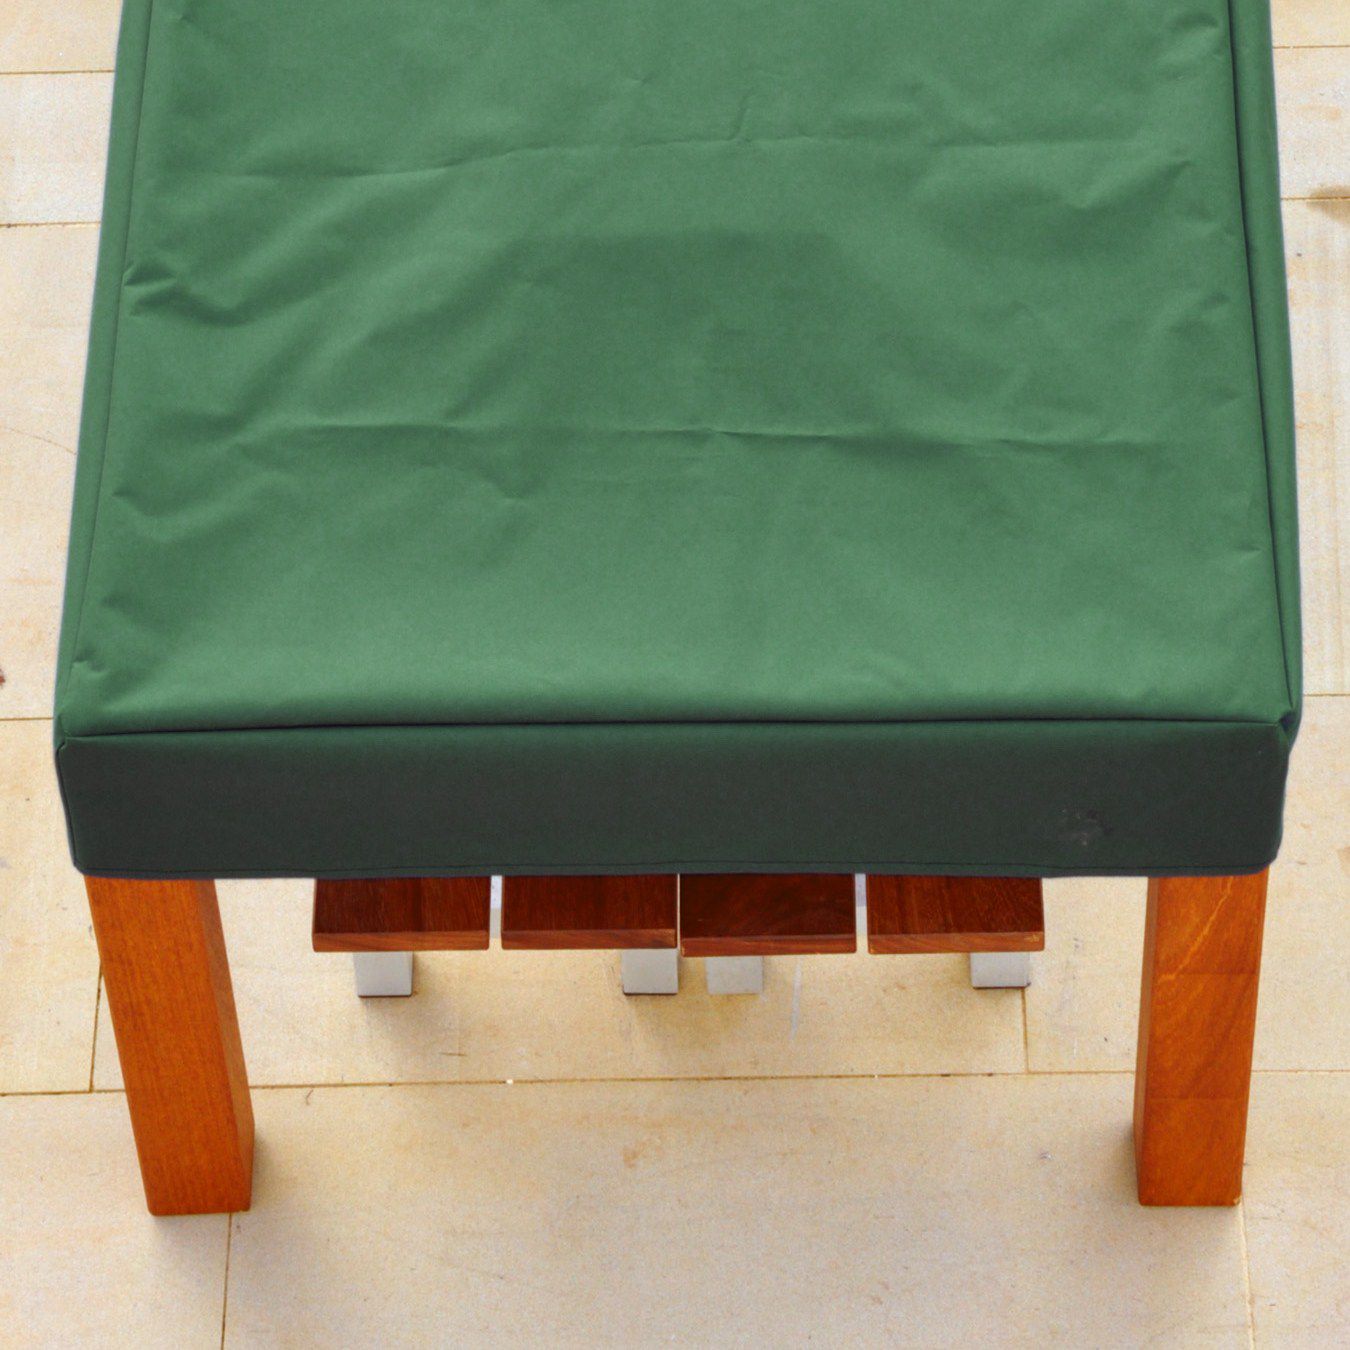 Cole Henley 8 Seat Barbecue Table Cover